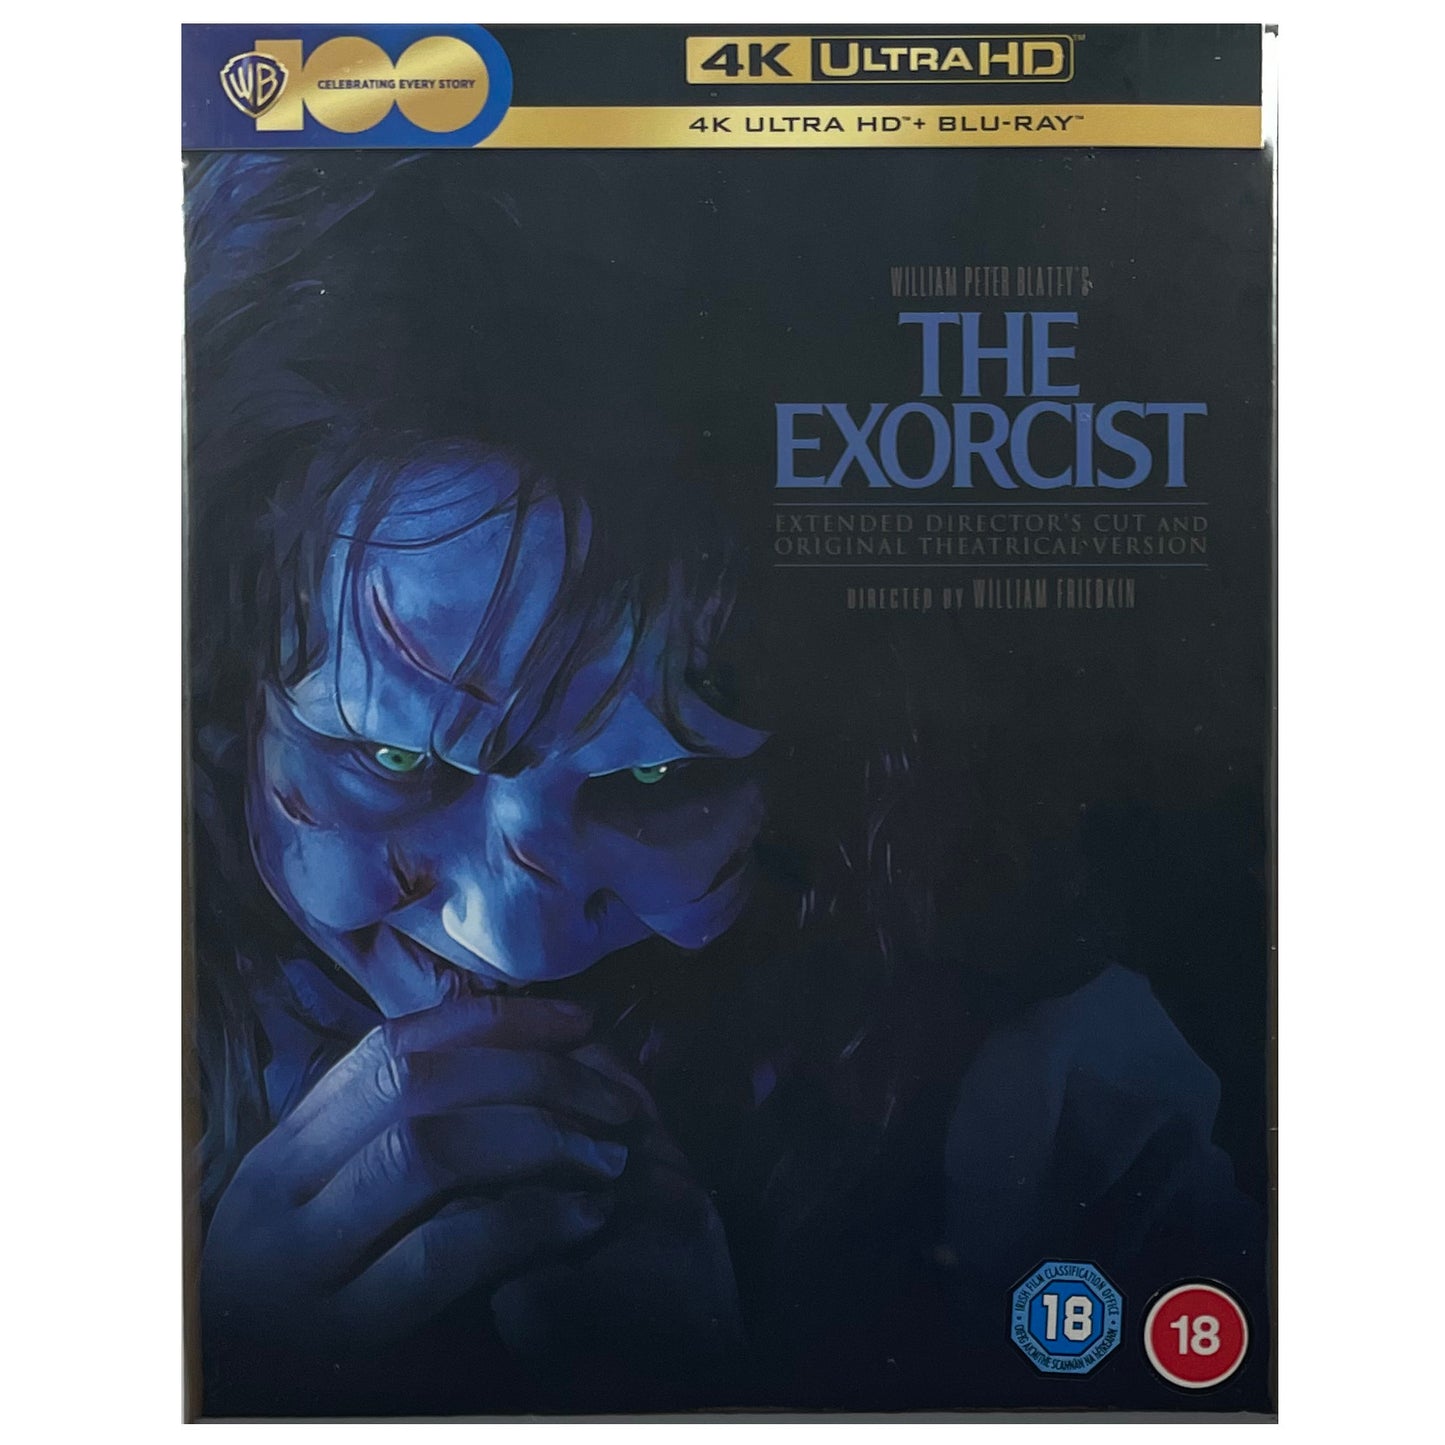 The Exorcist 4K Steelbook - Ultimate Collector's Edition